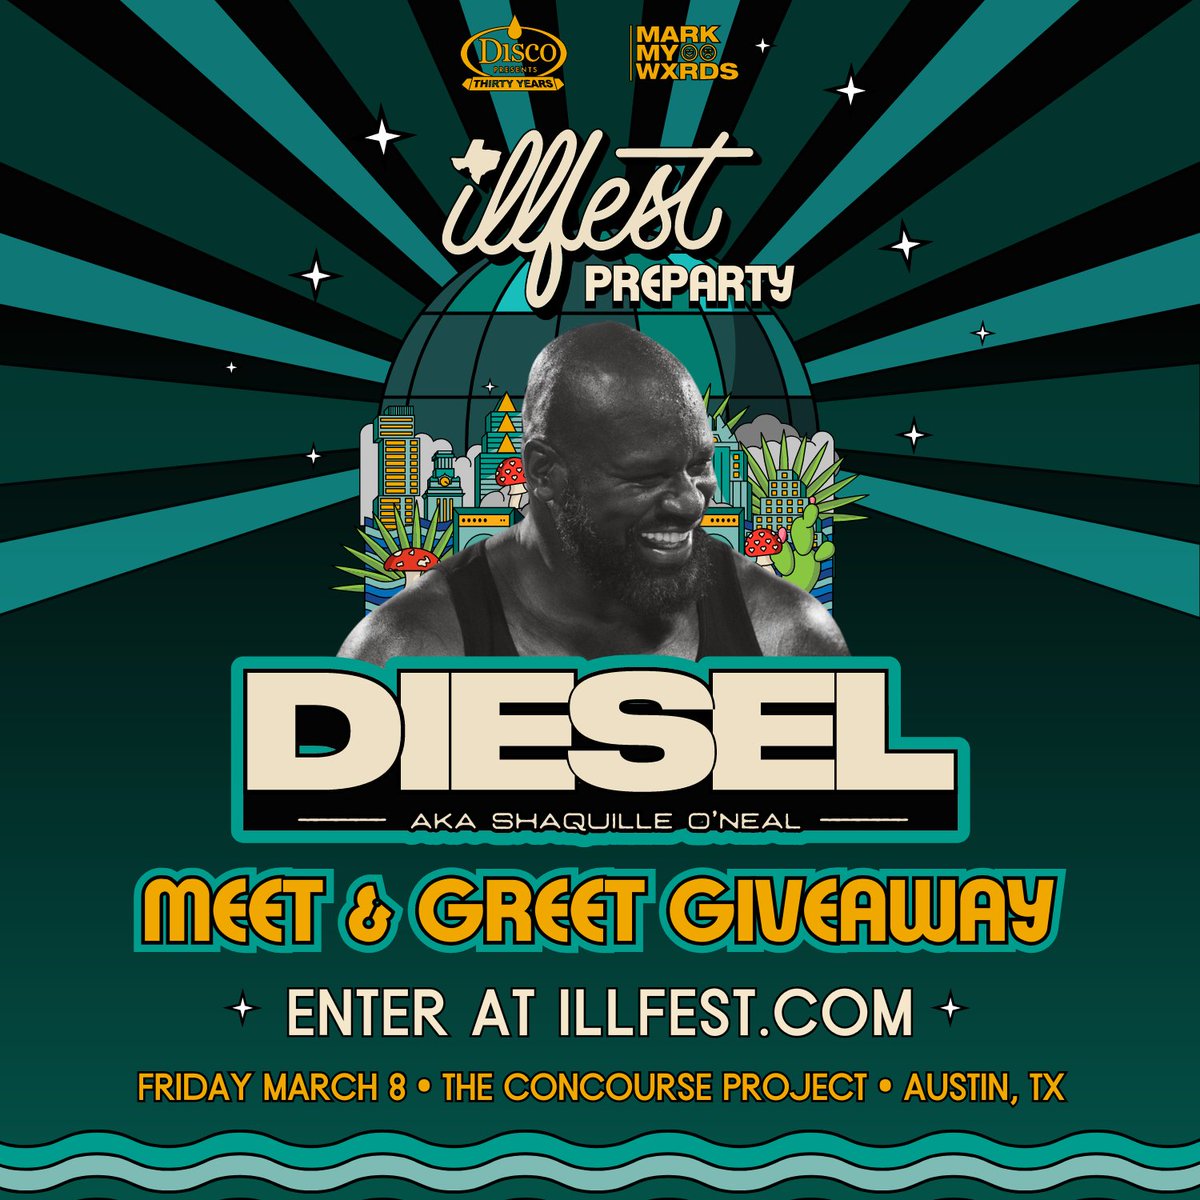 Want to score a meet & greet with @djdiesel at the ILLfest Pre-Party? We're giving YOU and a friend the opportunity to win ⬇️ ⚡️ DJ Diesel Meet & Greet ⚡️ 2 ILLfest Pre Party-Tickets Enter Here ➡️ app.hive.co/l/3umjjm @DiscoPresentsHQ @HeadbangSociety @MarkMyWxrdsTX